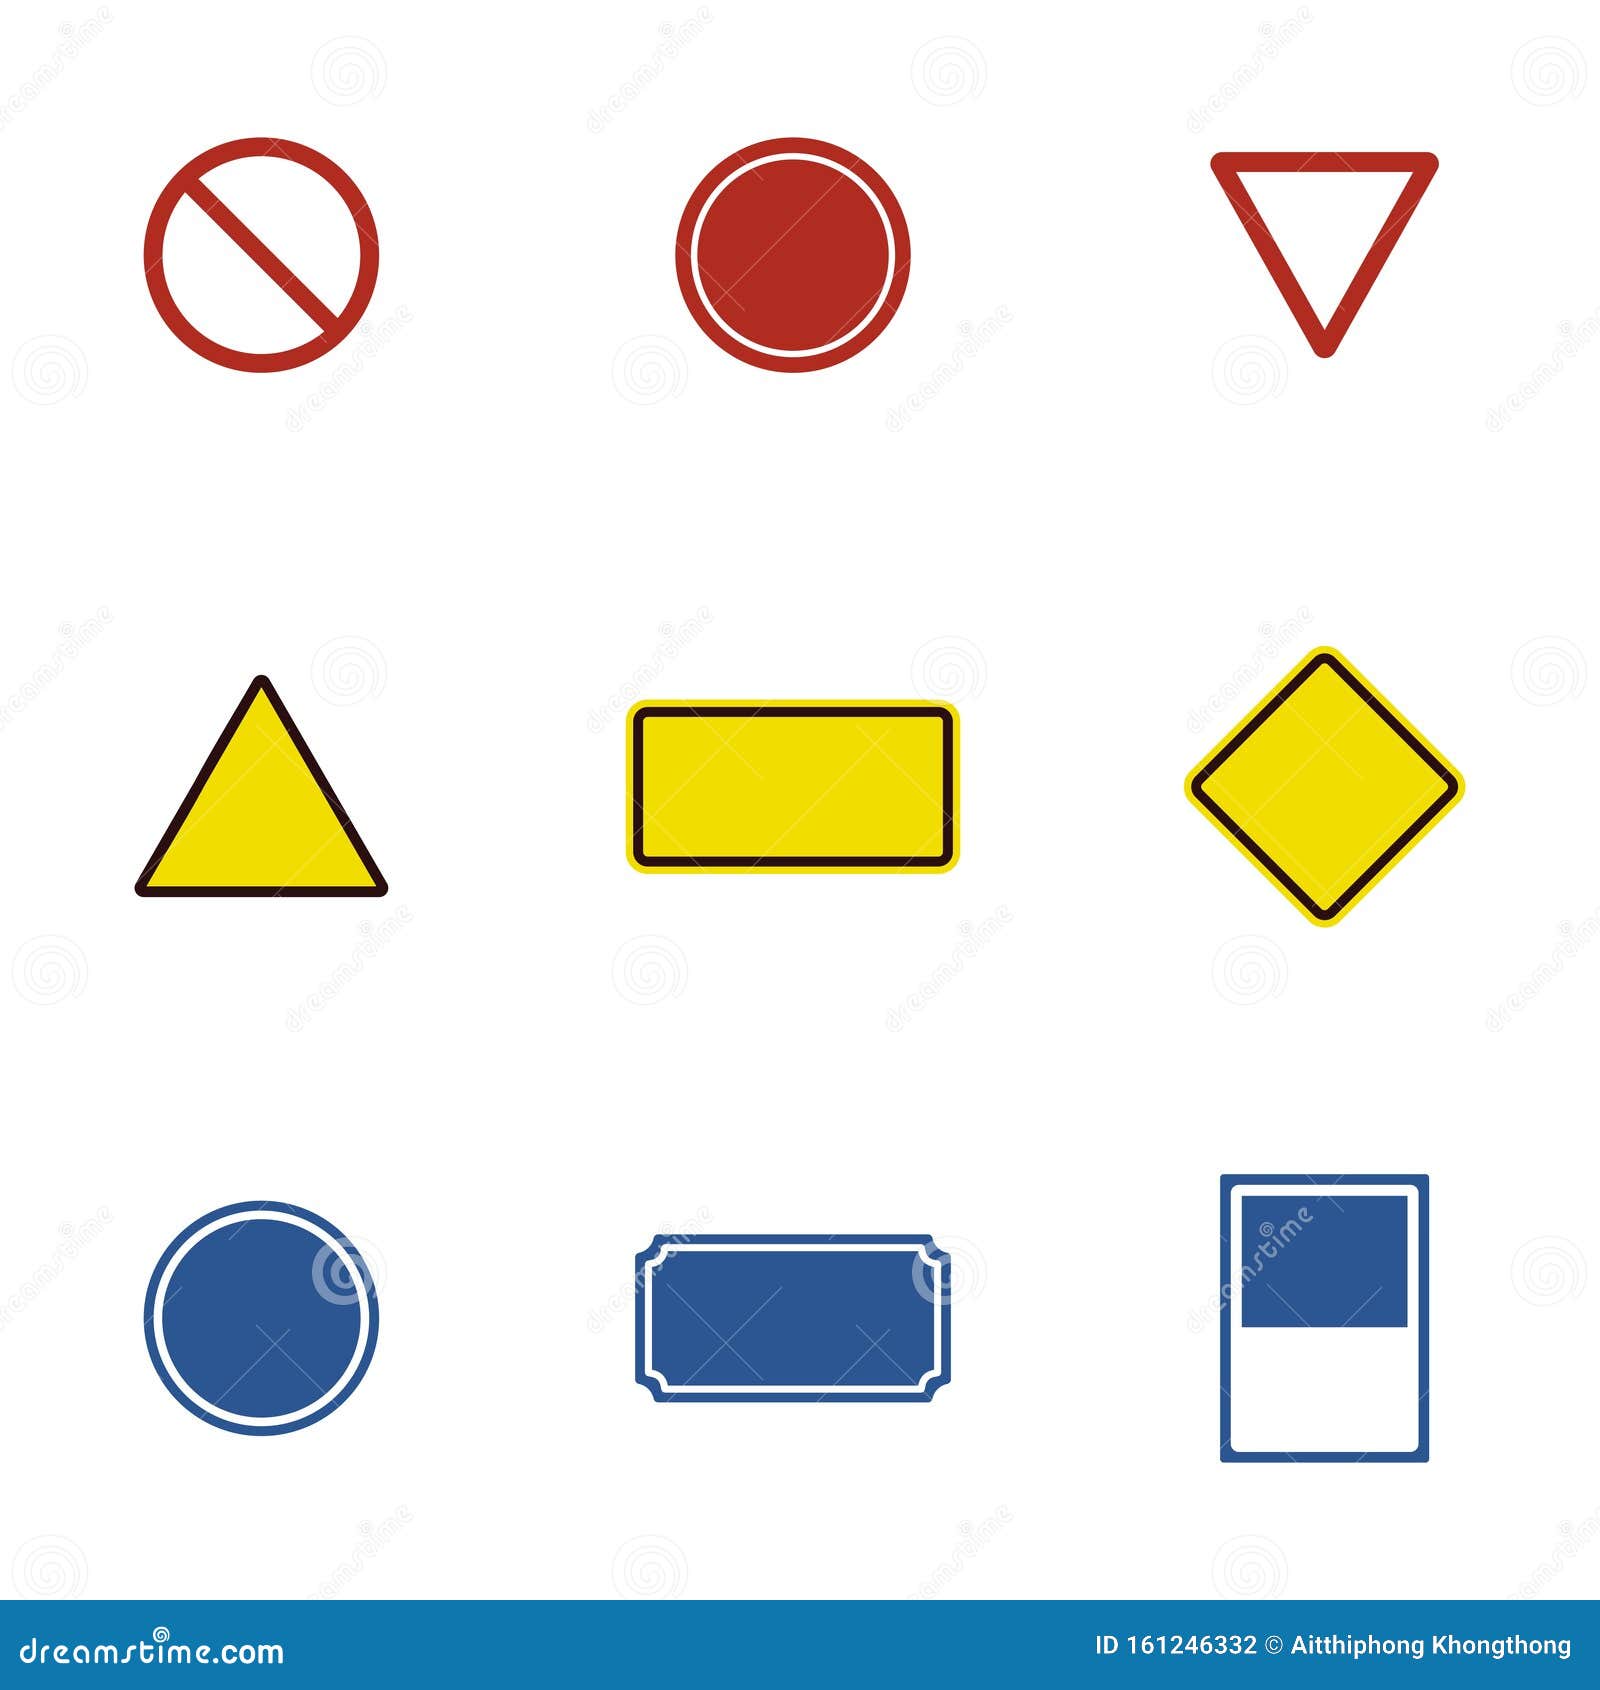 Blank Road Signs Red White Stock Illustrations 804 Blank Road Signs Red White Stock Illustrations Vectors Clipart Dreamstime